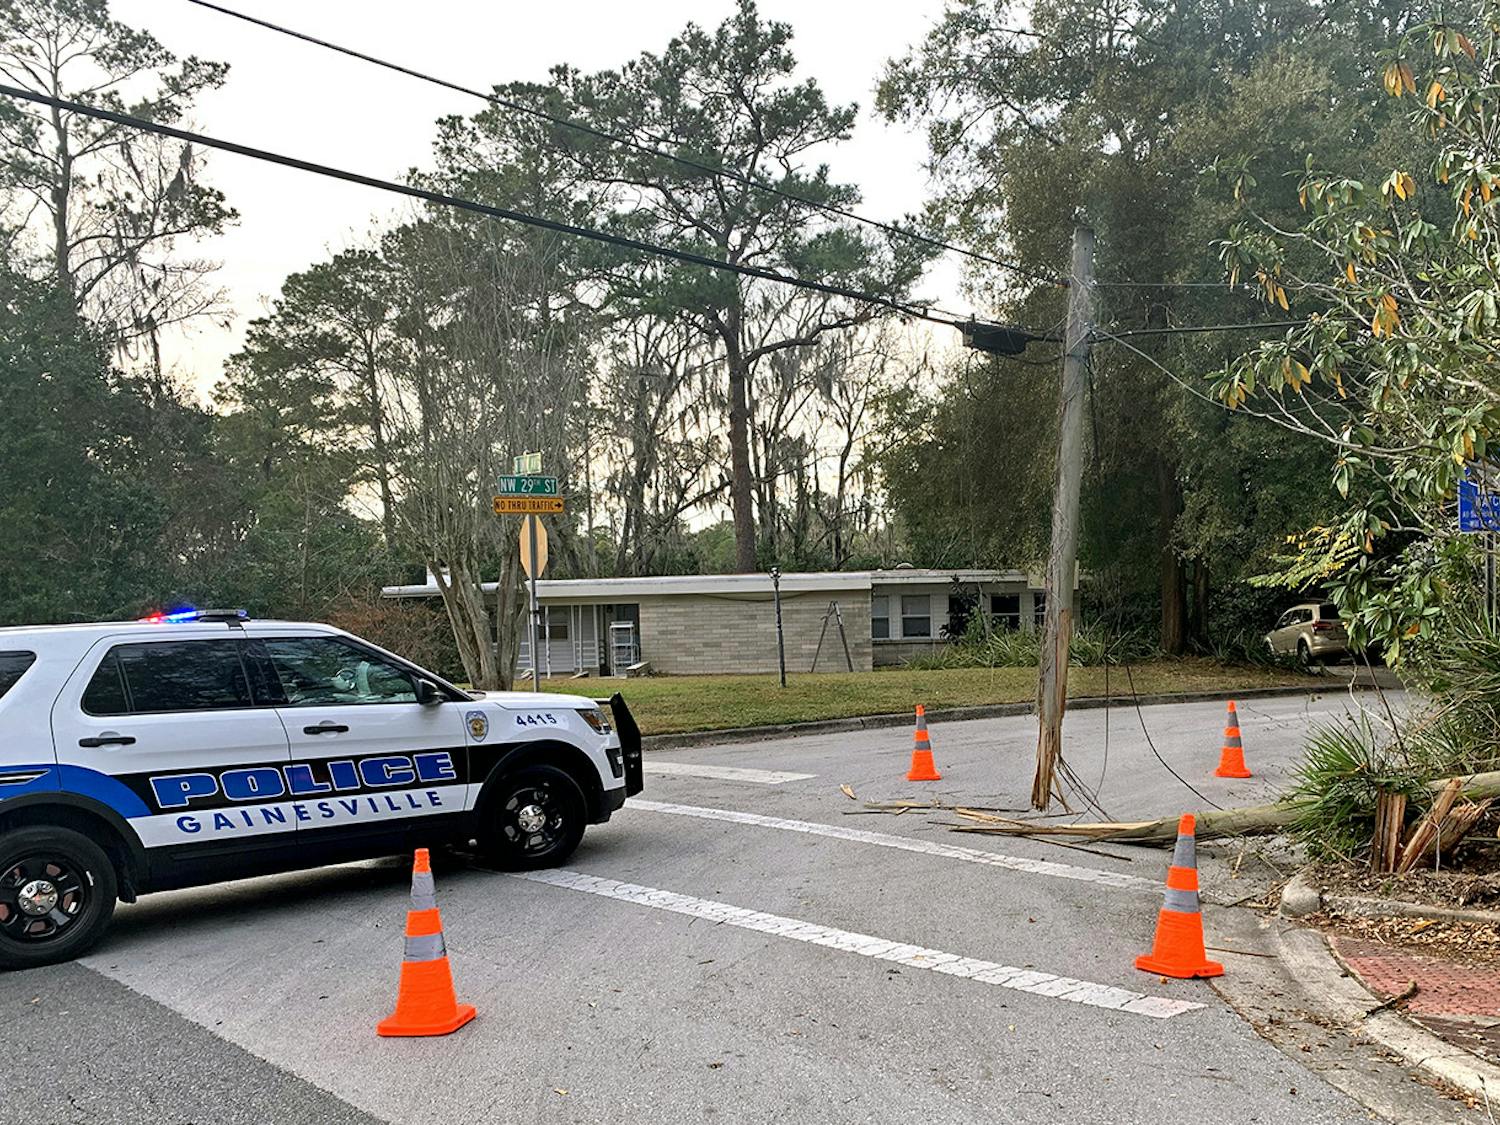 An electrical pole was damaged after a car crash on the corner of Northwest 29th Street and University Avenue on Monday, Jan. 25, 2021. This crash occurred nine days after the car crash on West University Avenue that killed UF student Sophia Lambert and left five others hospitalized.